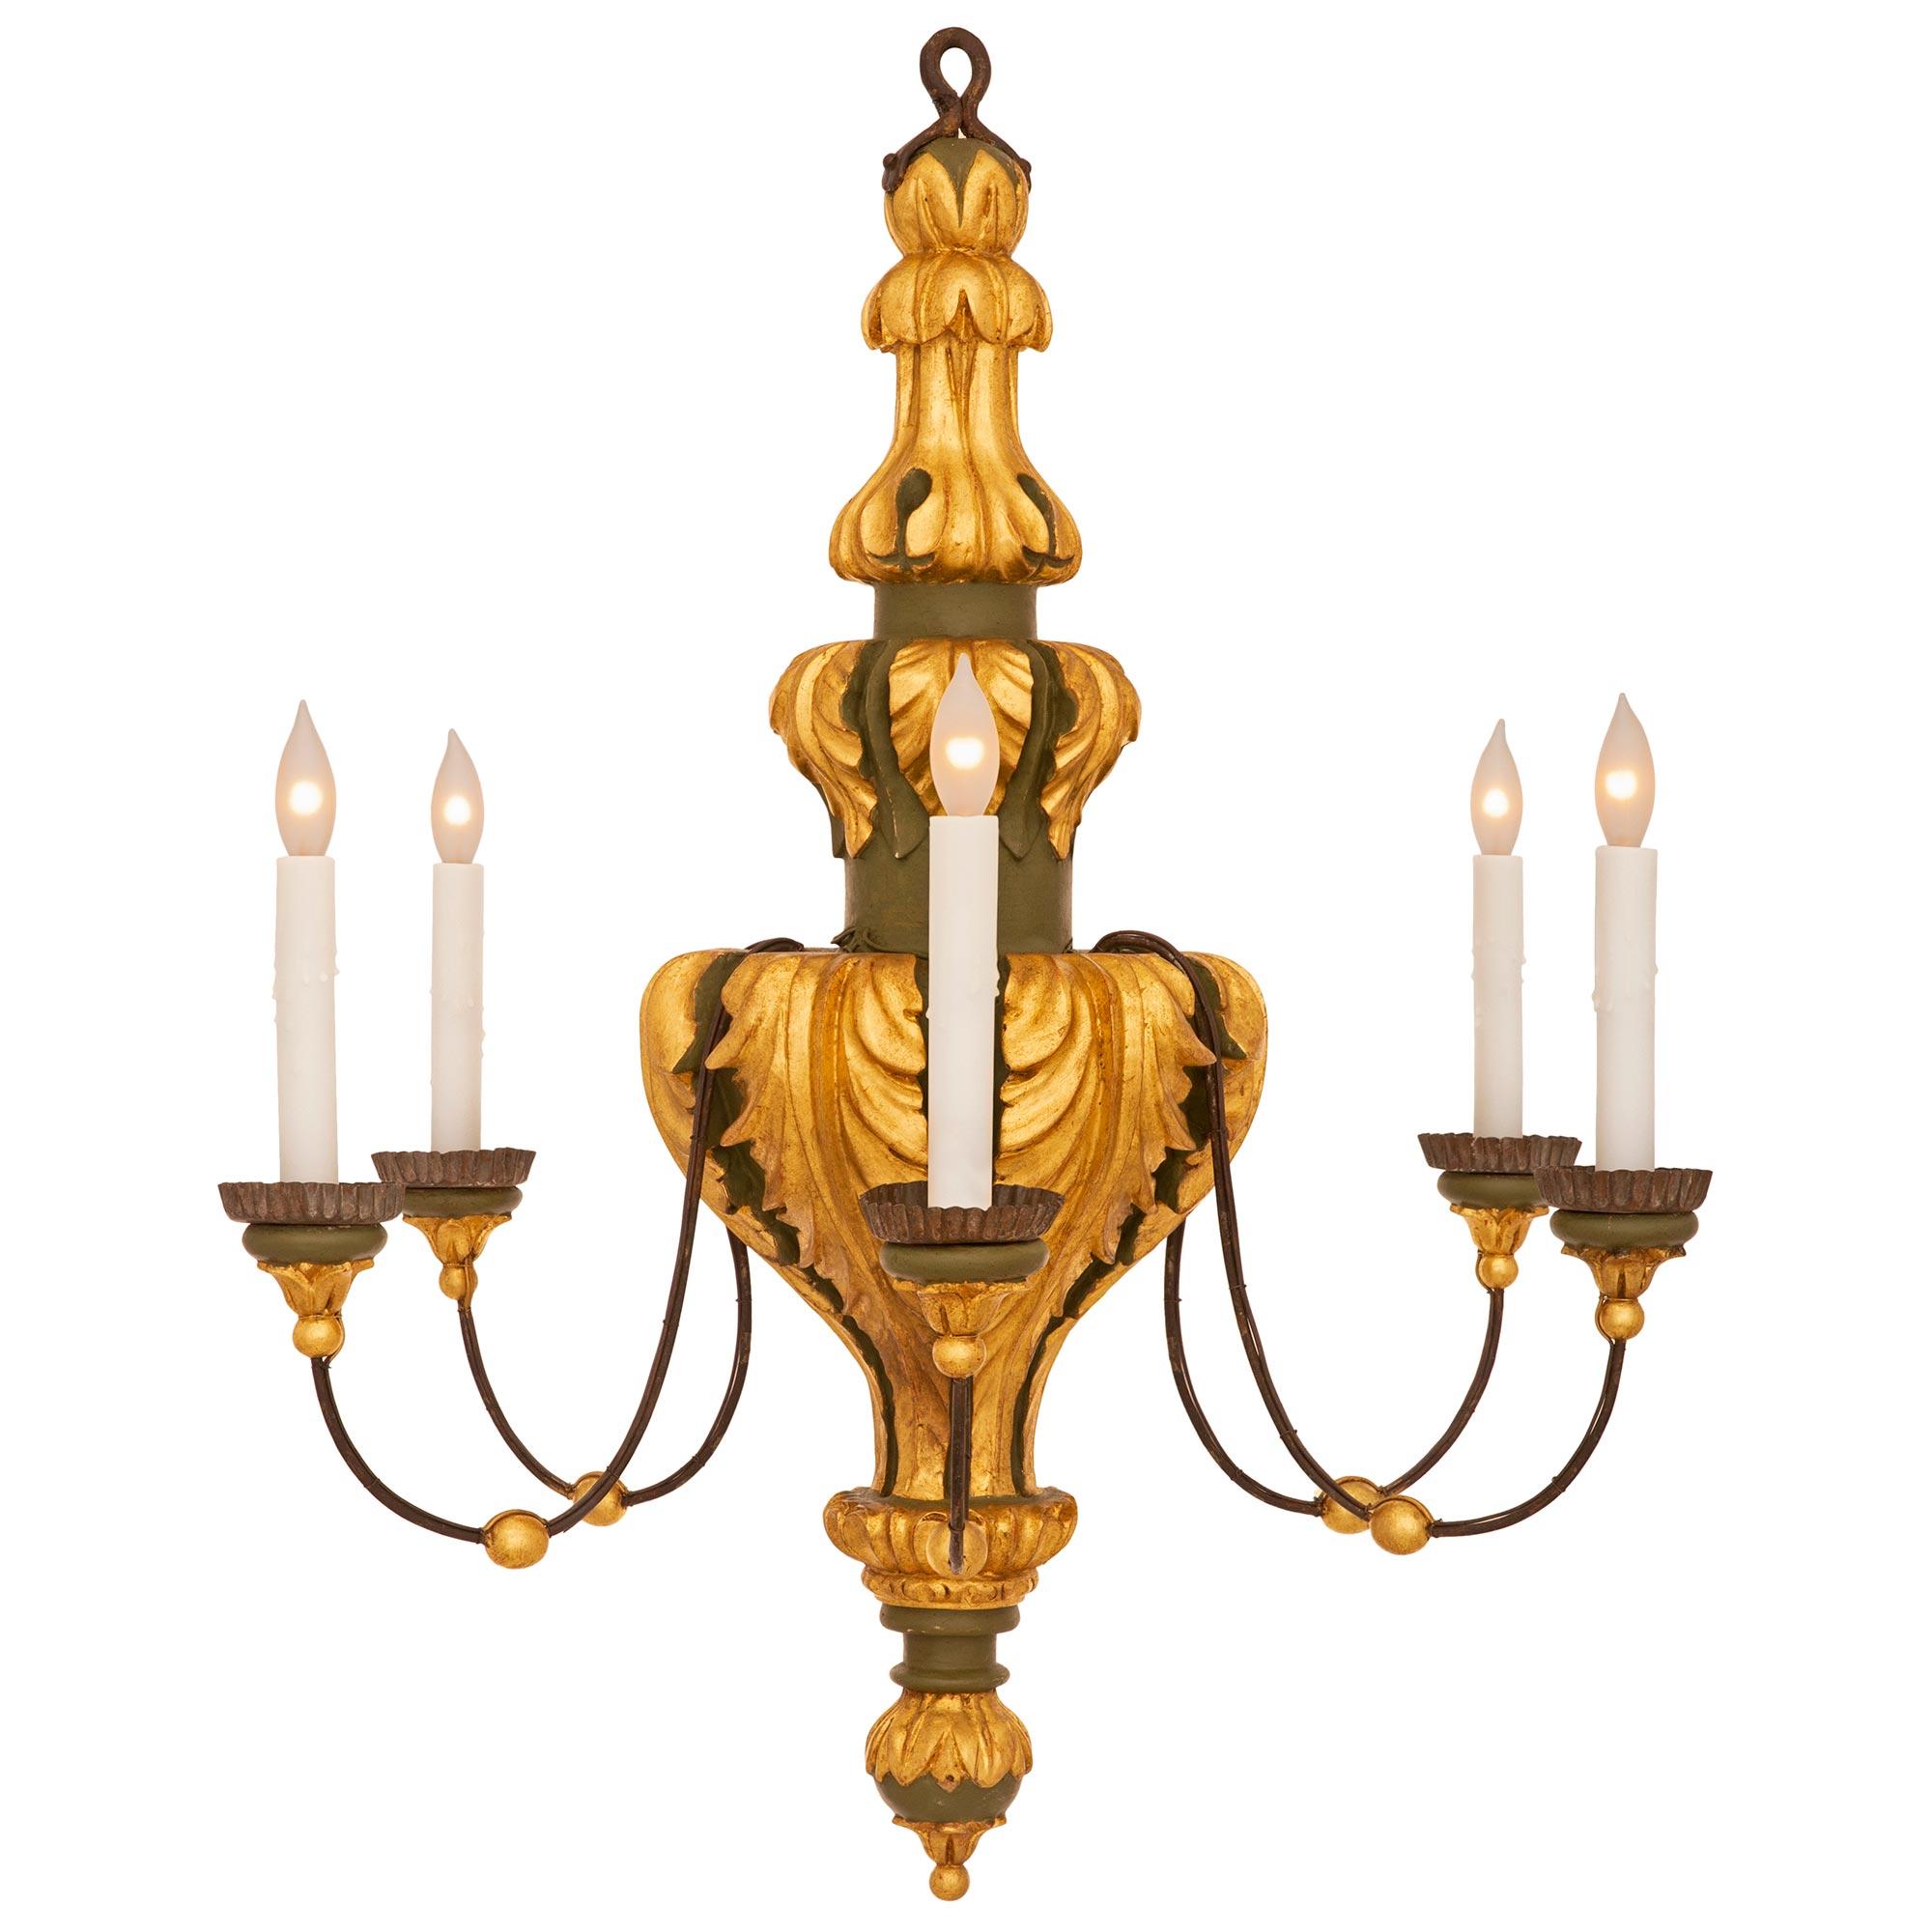 A beautiful and most most decorative Italian 19th century Louis XVI st. patinated and giltwood chandelier. The six arm chandelier is centered by a lovely topie shaped and foliate ball bottom finial below the exceptional and unique baluster shaped